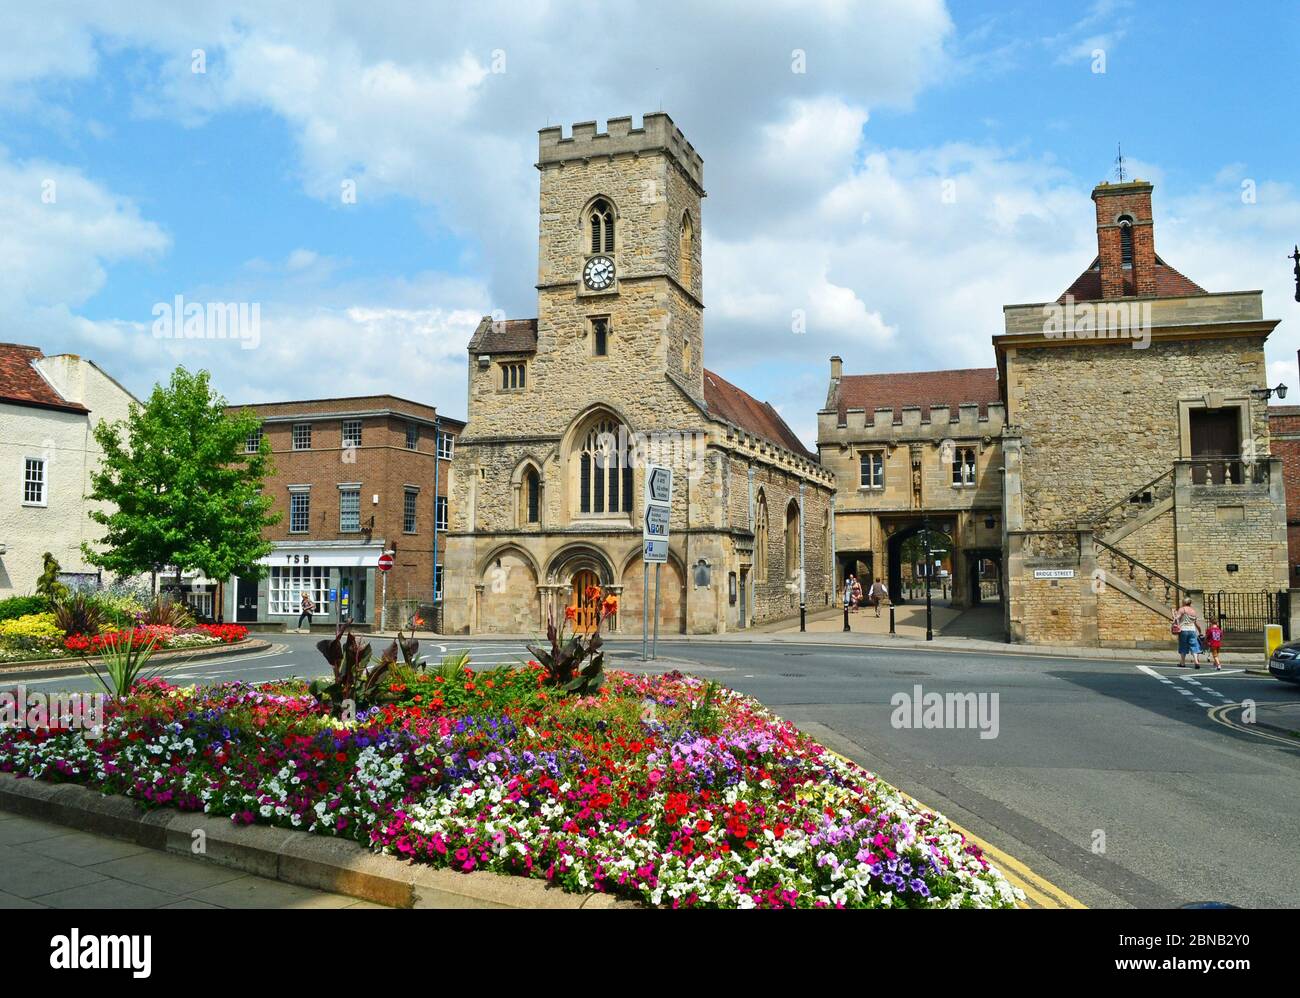 Flowers in front of a church in Abingdon town centre, Oxfordshire, UK Stock Photo